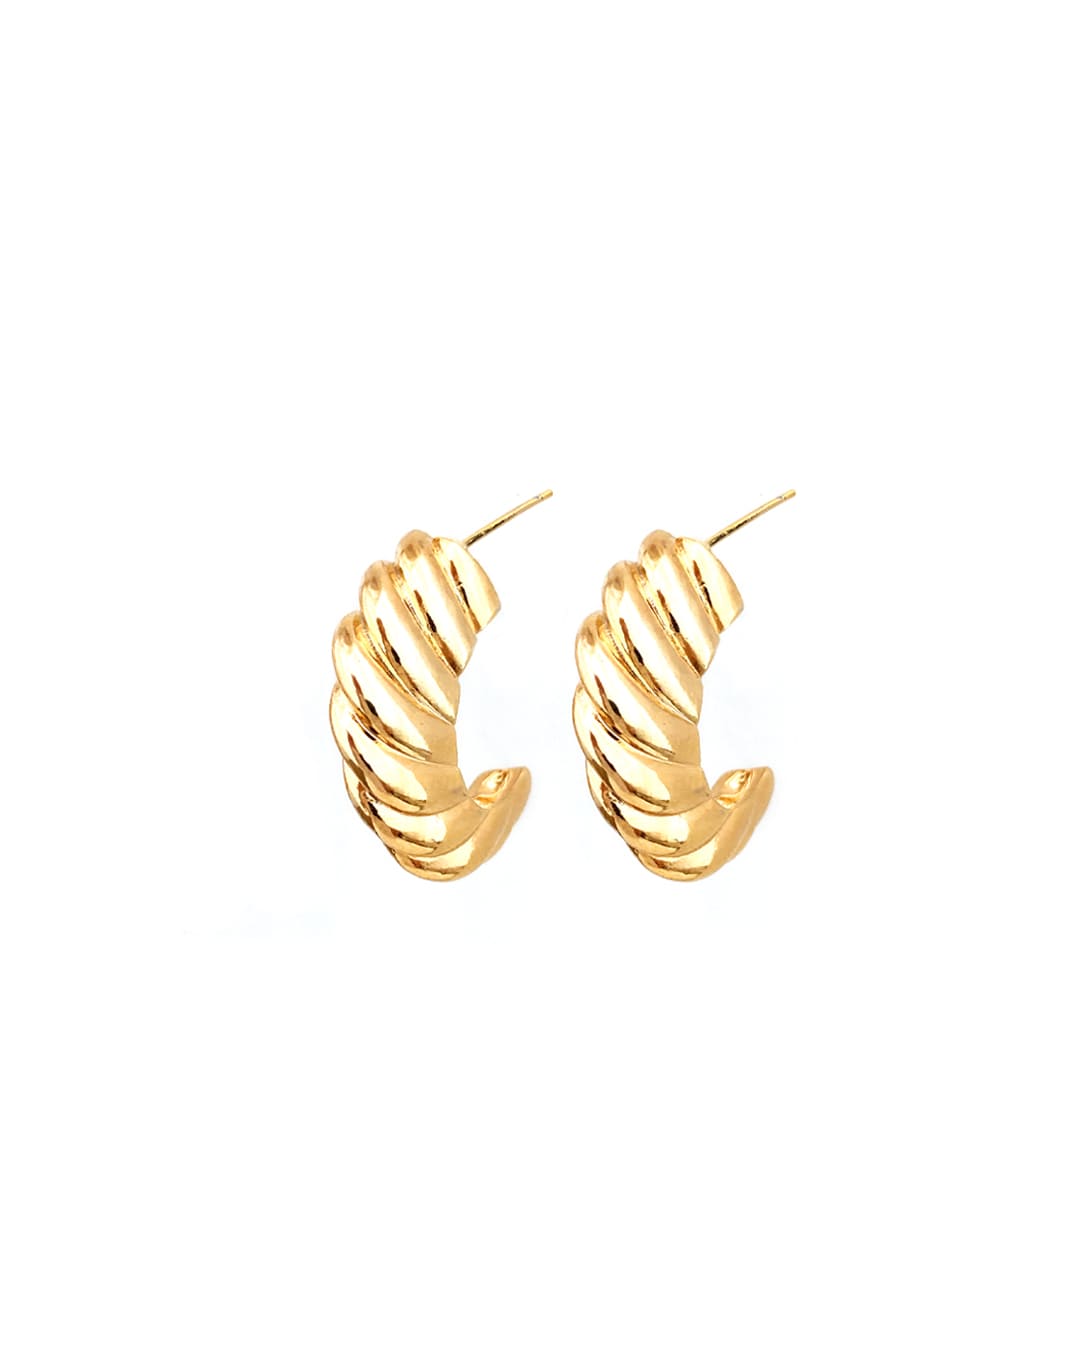 Cresson Gold Earrings